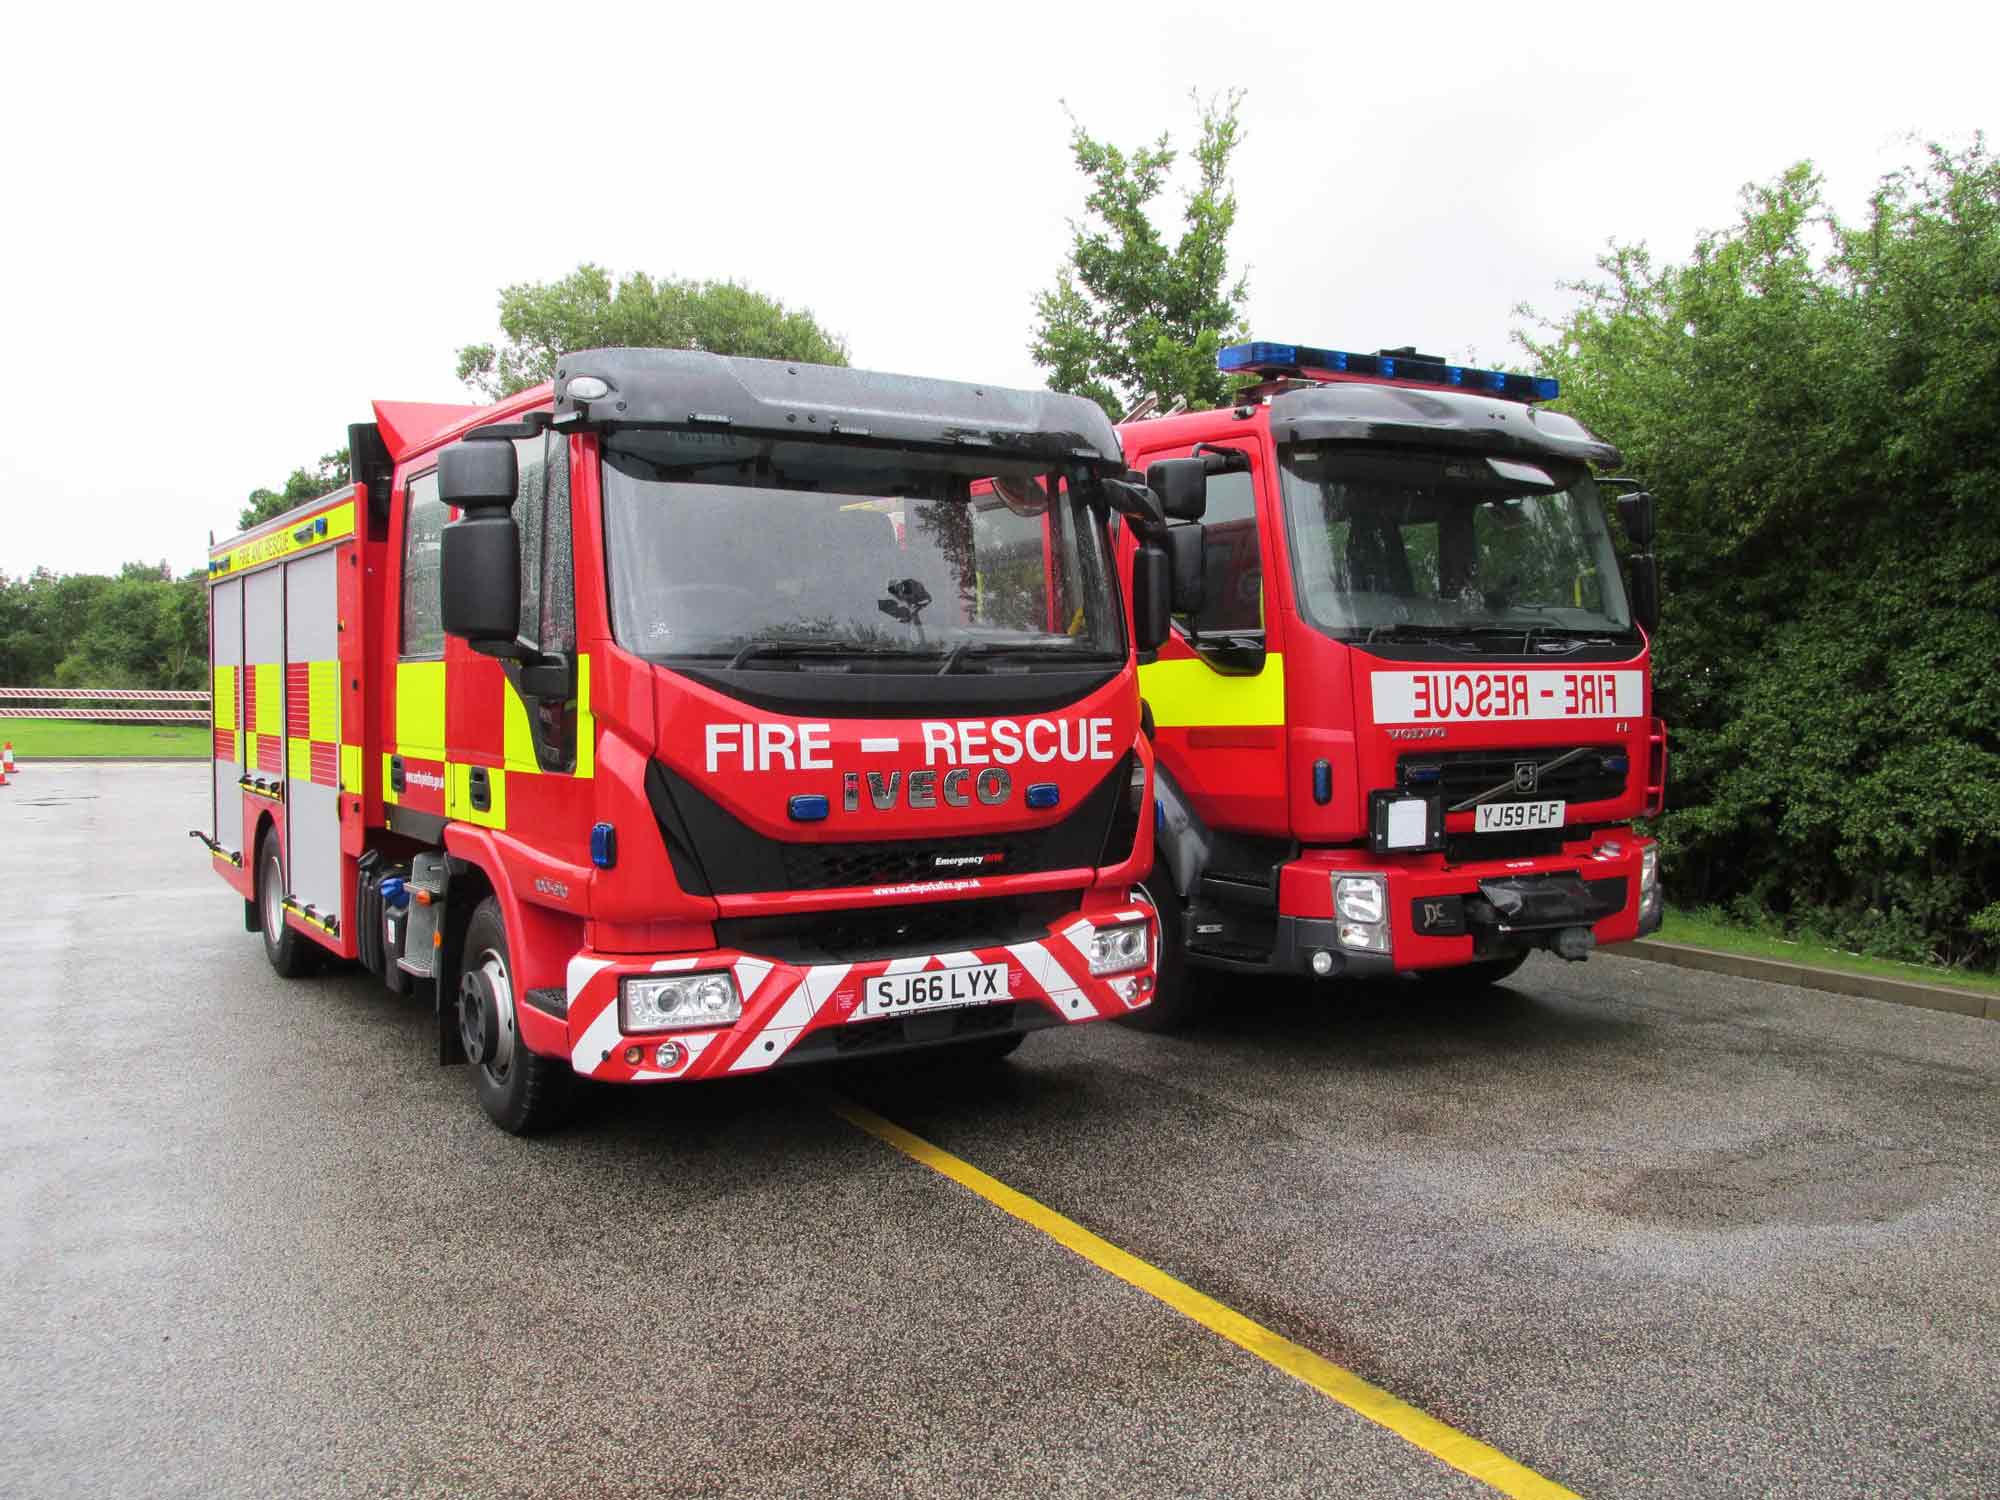 TRV and fire engine 001- show TRV (left) and a standard fire engine (right)